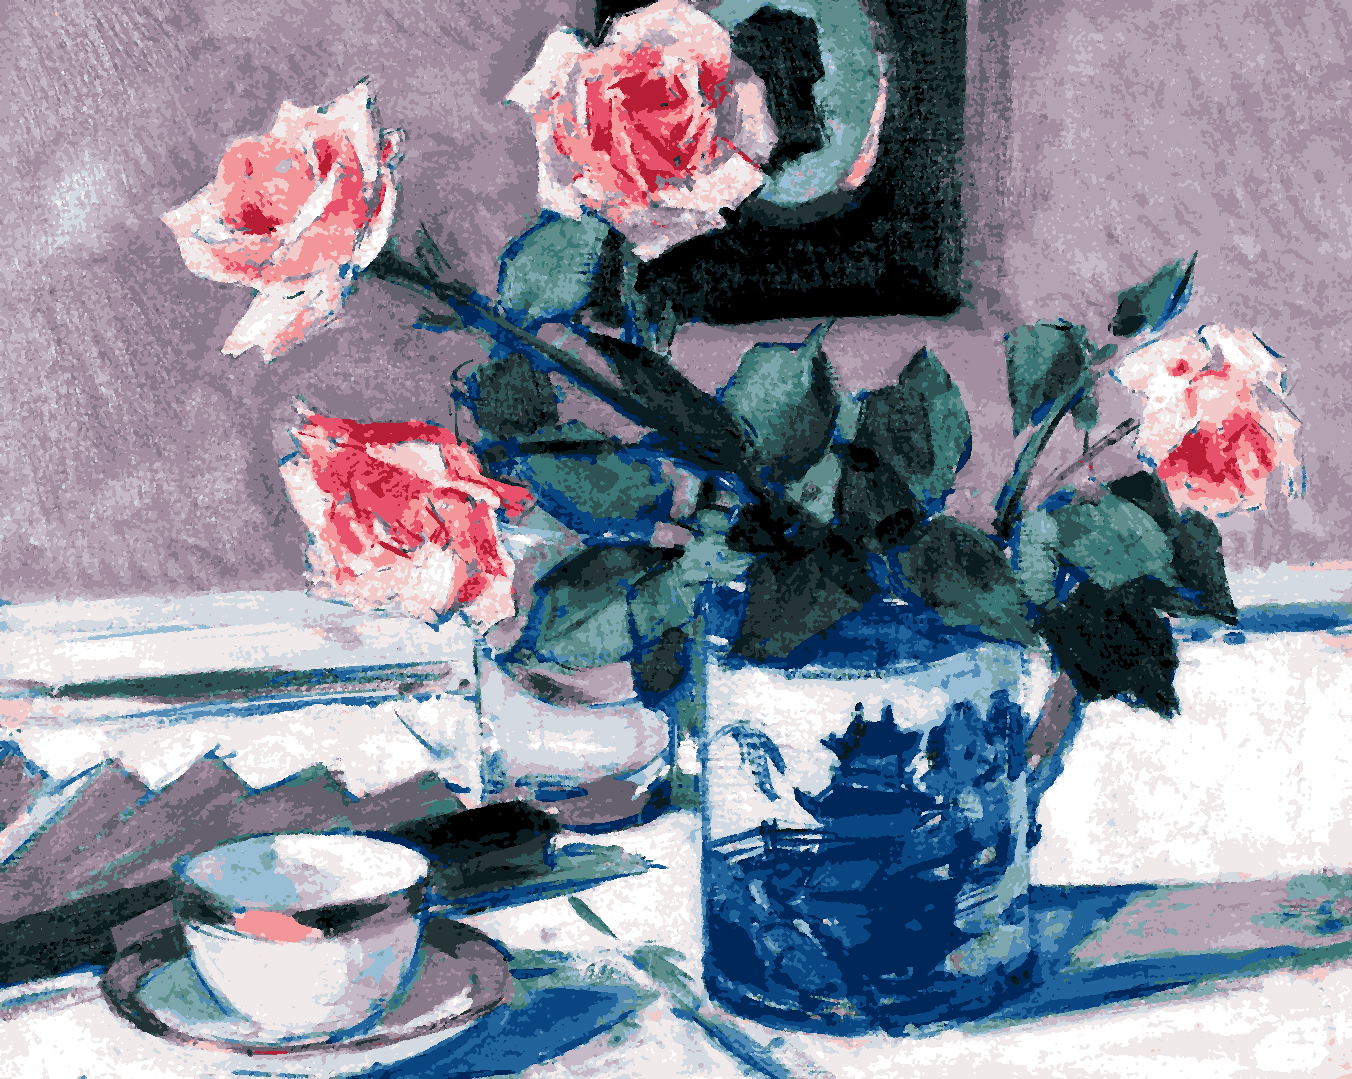 Pink Roses by Francis Campbell Boileau Cadell - Van-Go Paint-By-Number Kit